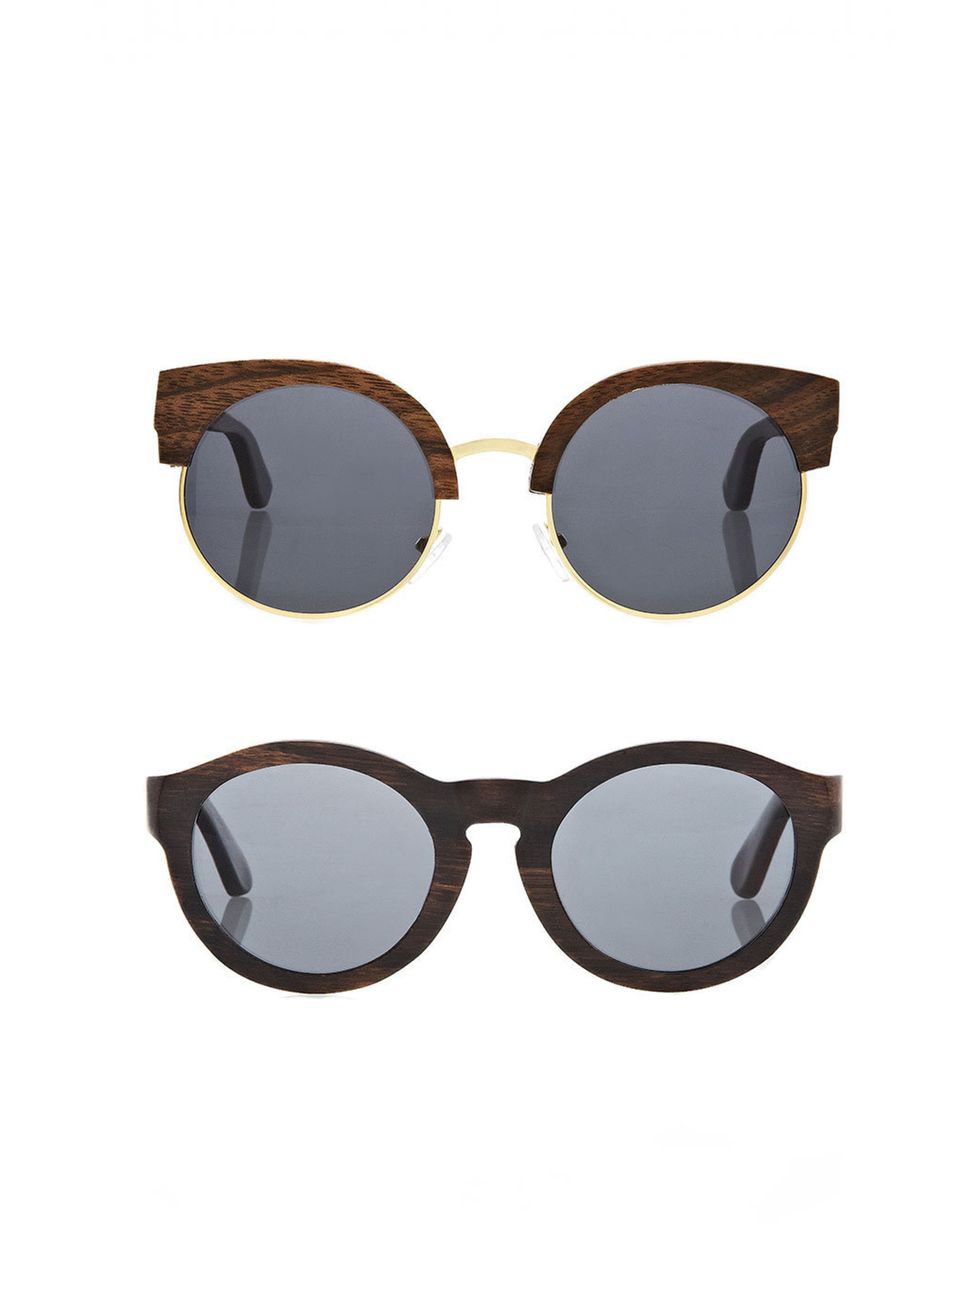 <p><a href="http://www.finlayandco.com/">Finlay & Co</a></p><p>Carven from wood, these are timeless frames for the discerning style maven. Choose from five different style in walnut, ebony, zebrano or rosewood.</p>